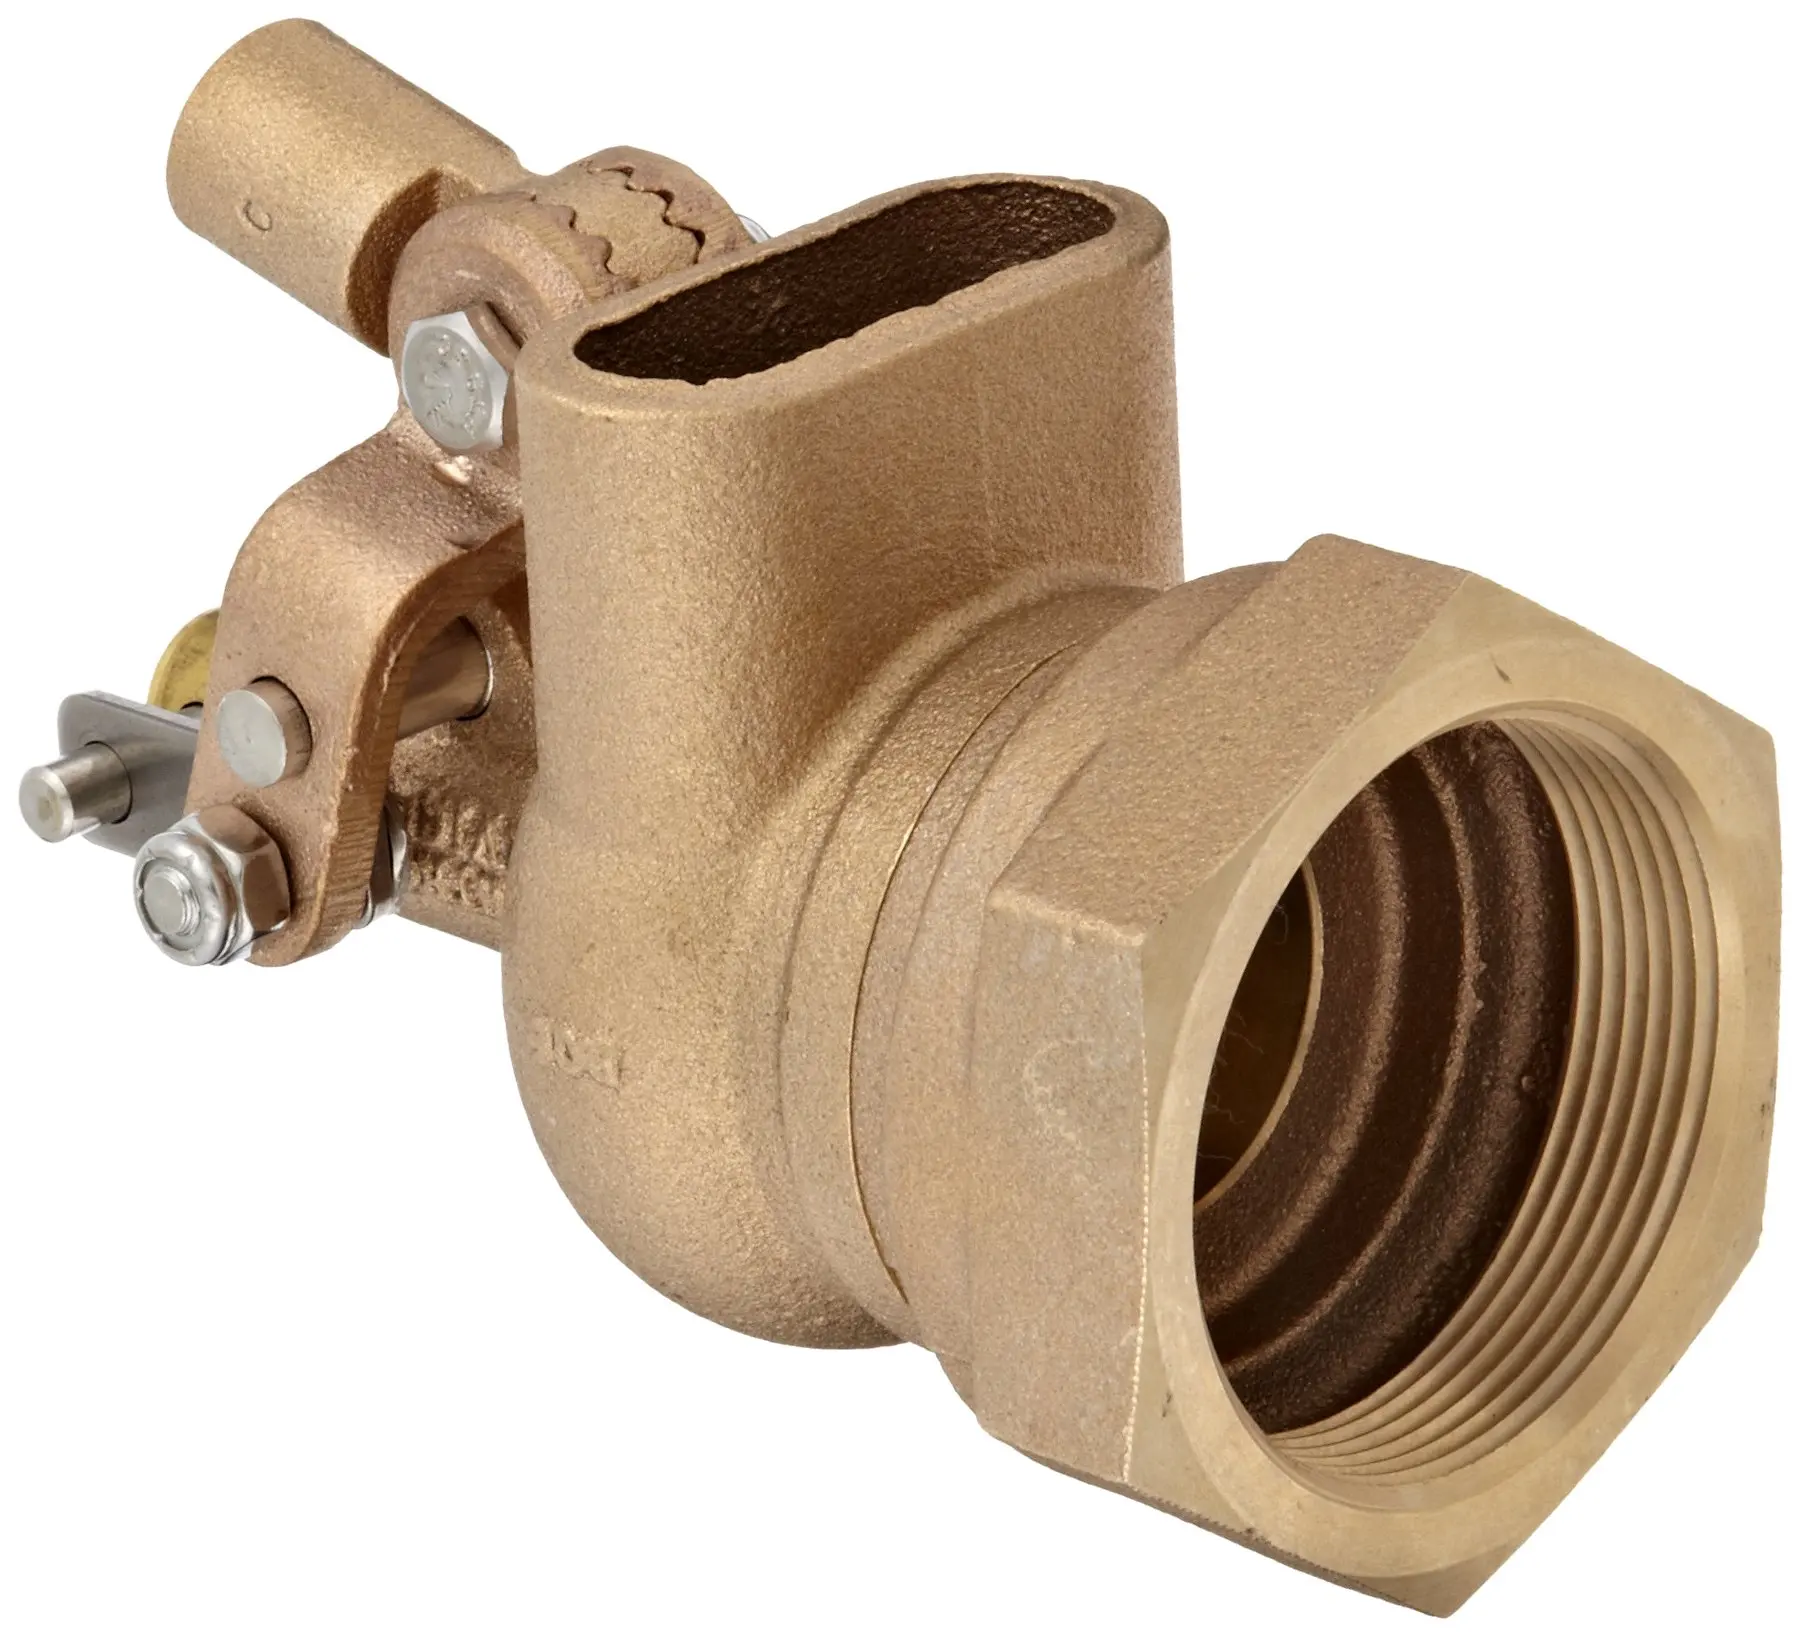 Robert Manufacturing R400 Series Bob Red Brass Float Valve Pack 399 Gpm At 85 Psi Pressure 34 